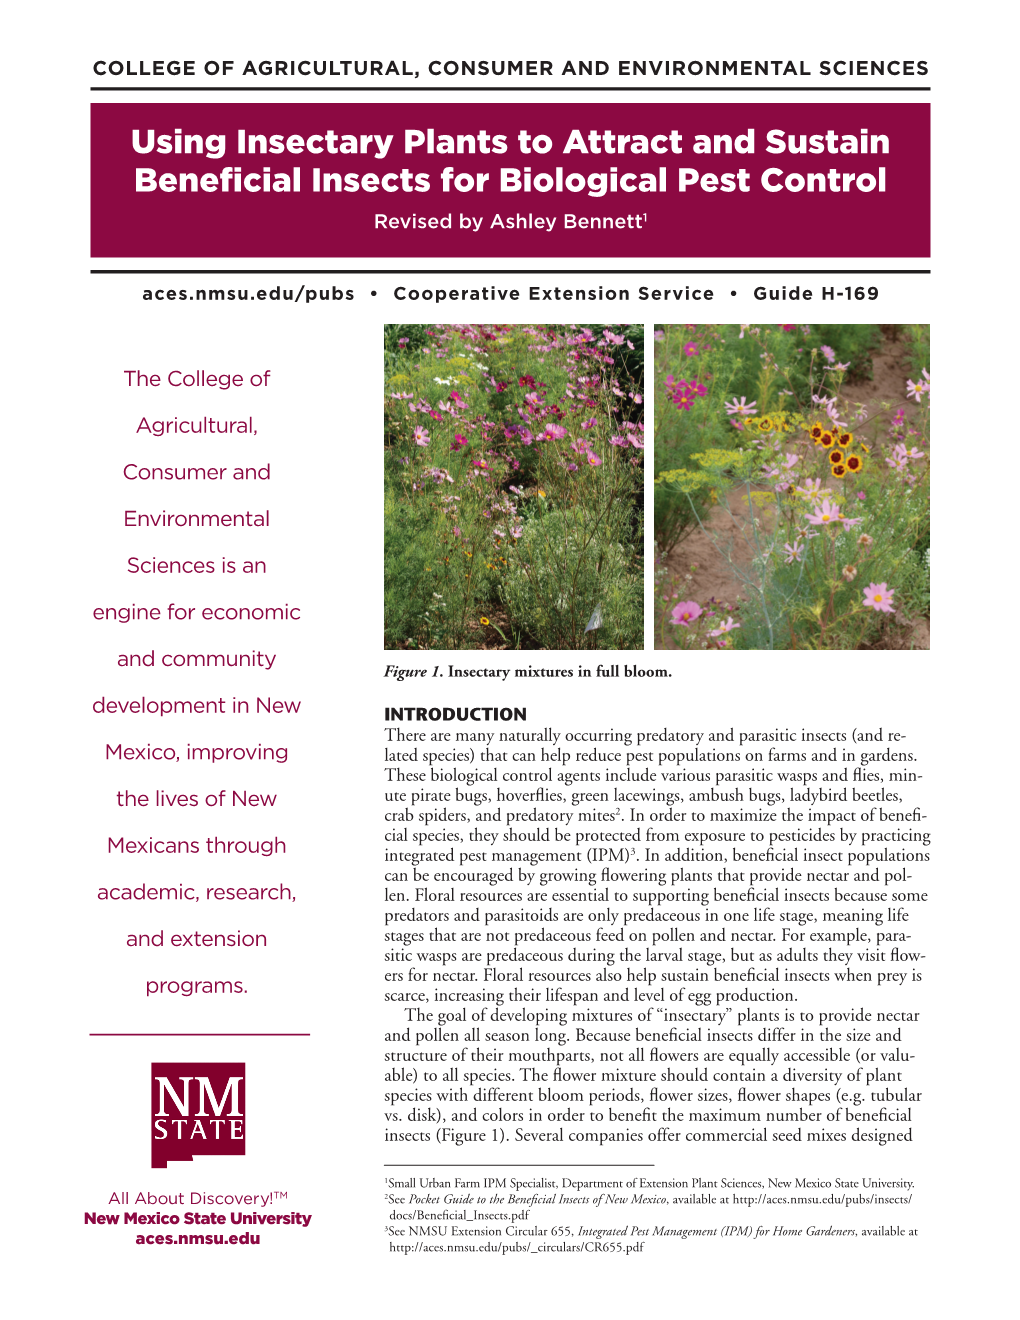 Using Insectary Plants to Attract and Sustain Beneficial Insects for Biological Pest Control